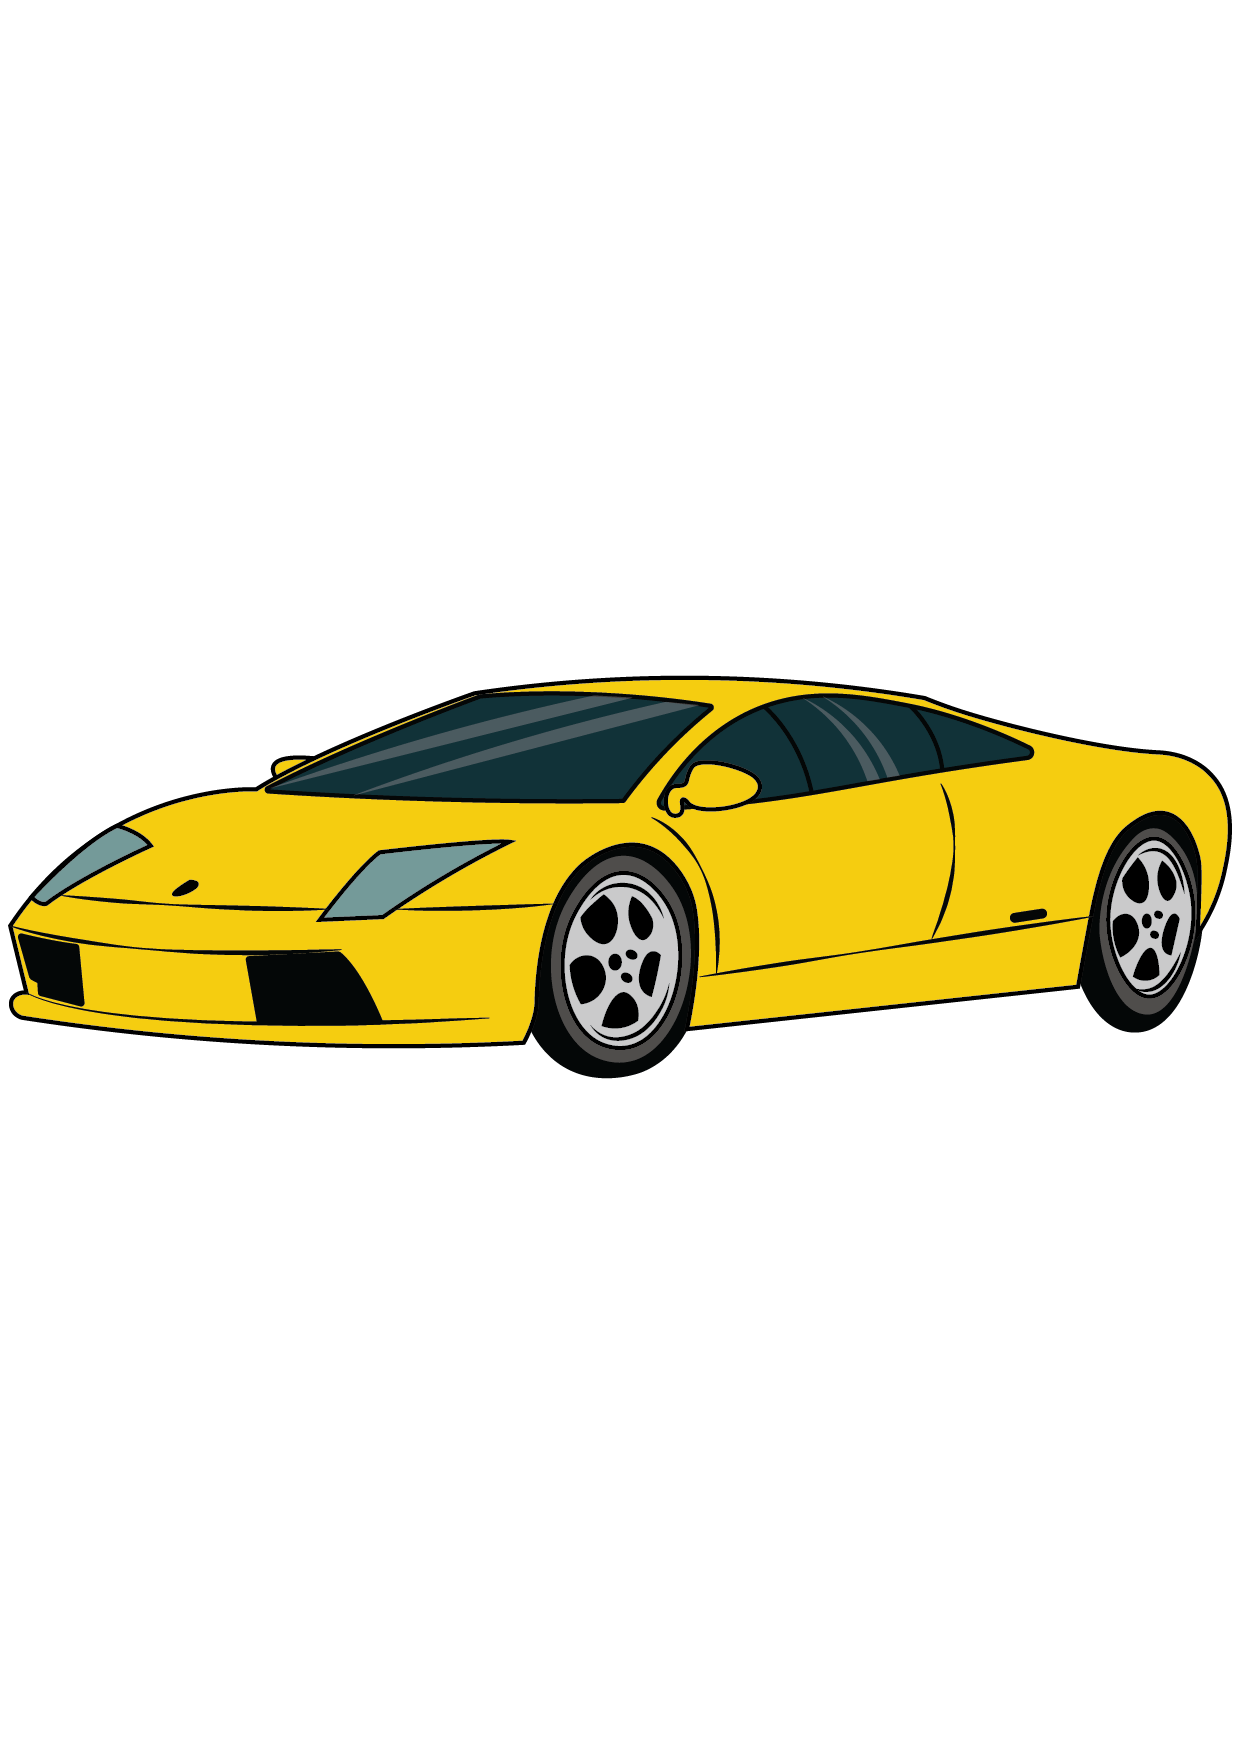 How to Draw A Lamborghini Step by Step Printable